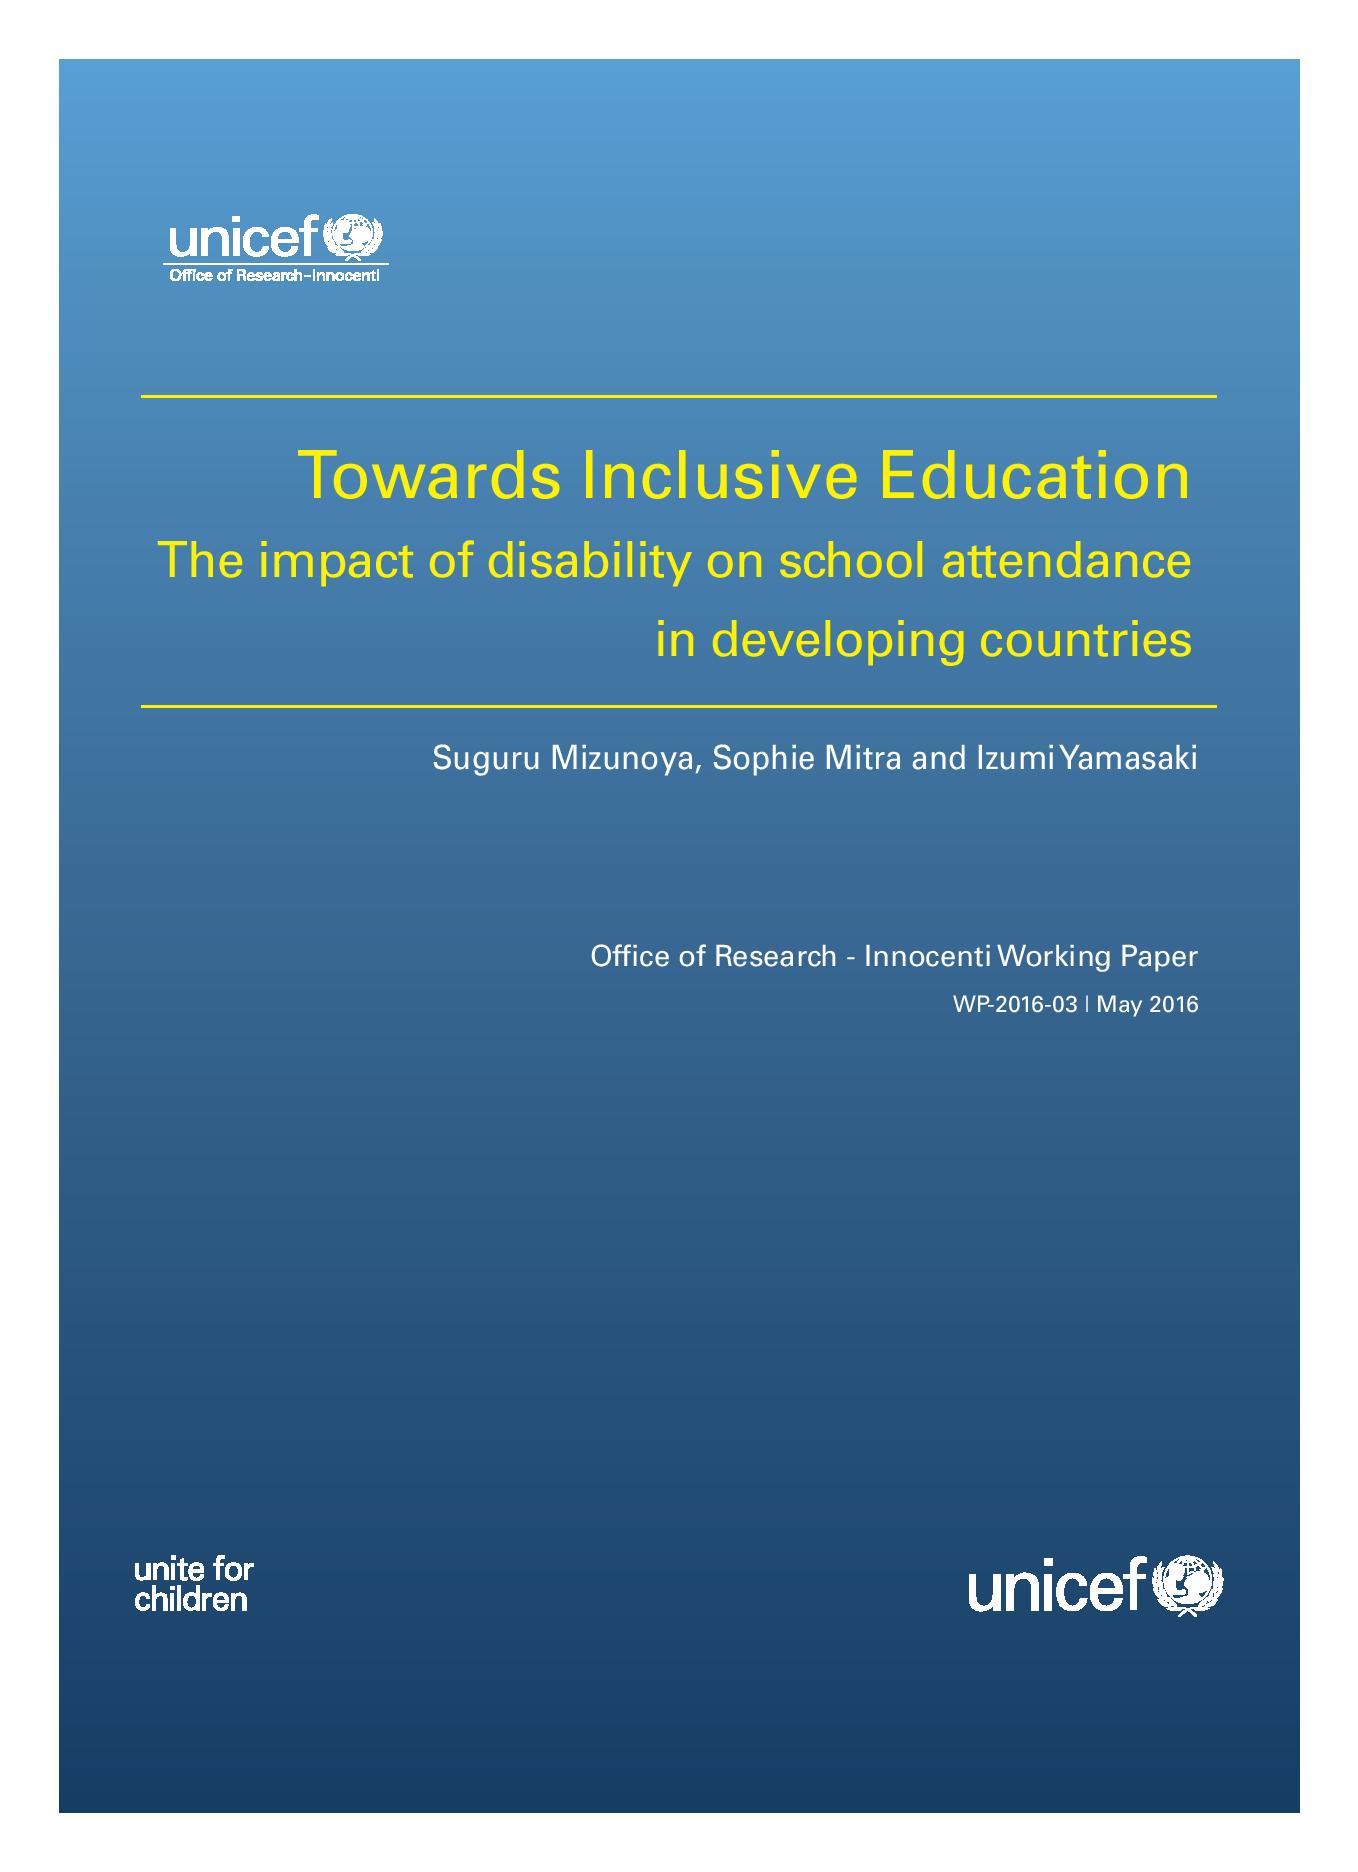 Towards inclusive education: the impact of disability on school attendance in developing countriesOffice of Research Innocenti Working Paper UNICEF